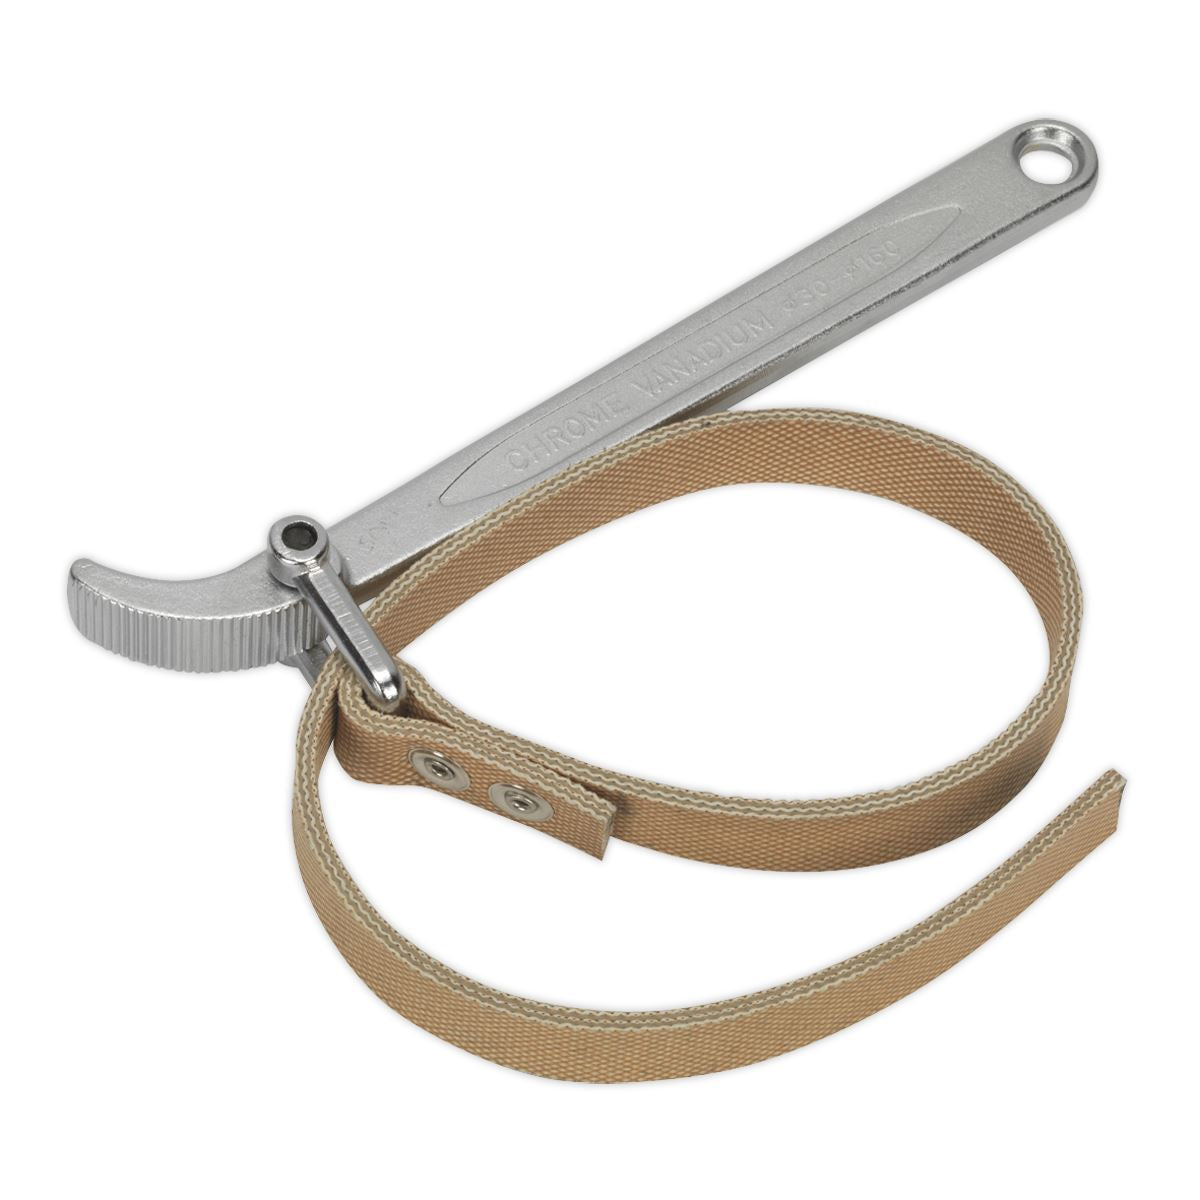 Sealey Oil Filter Strap Wrench Ø60-140mm Capacity